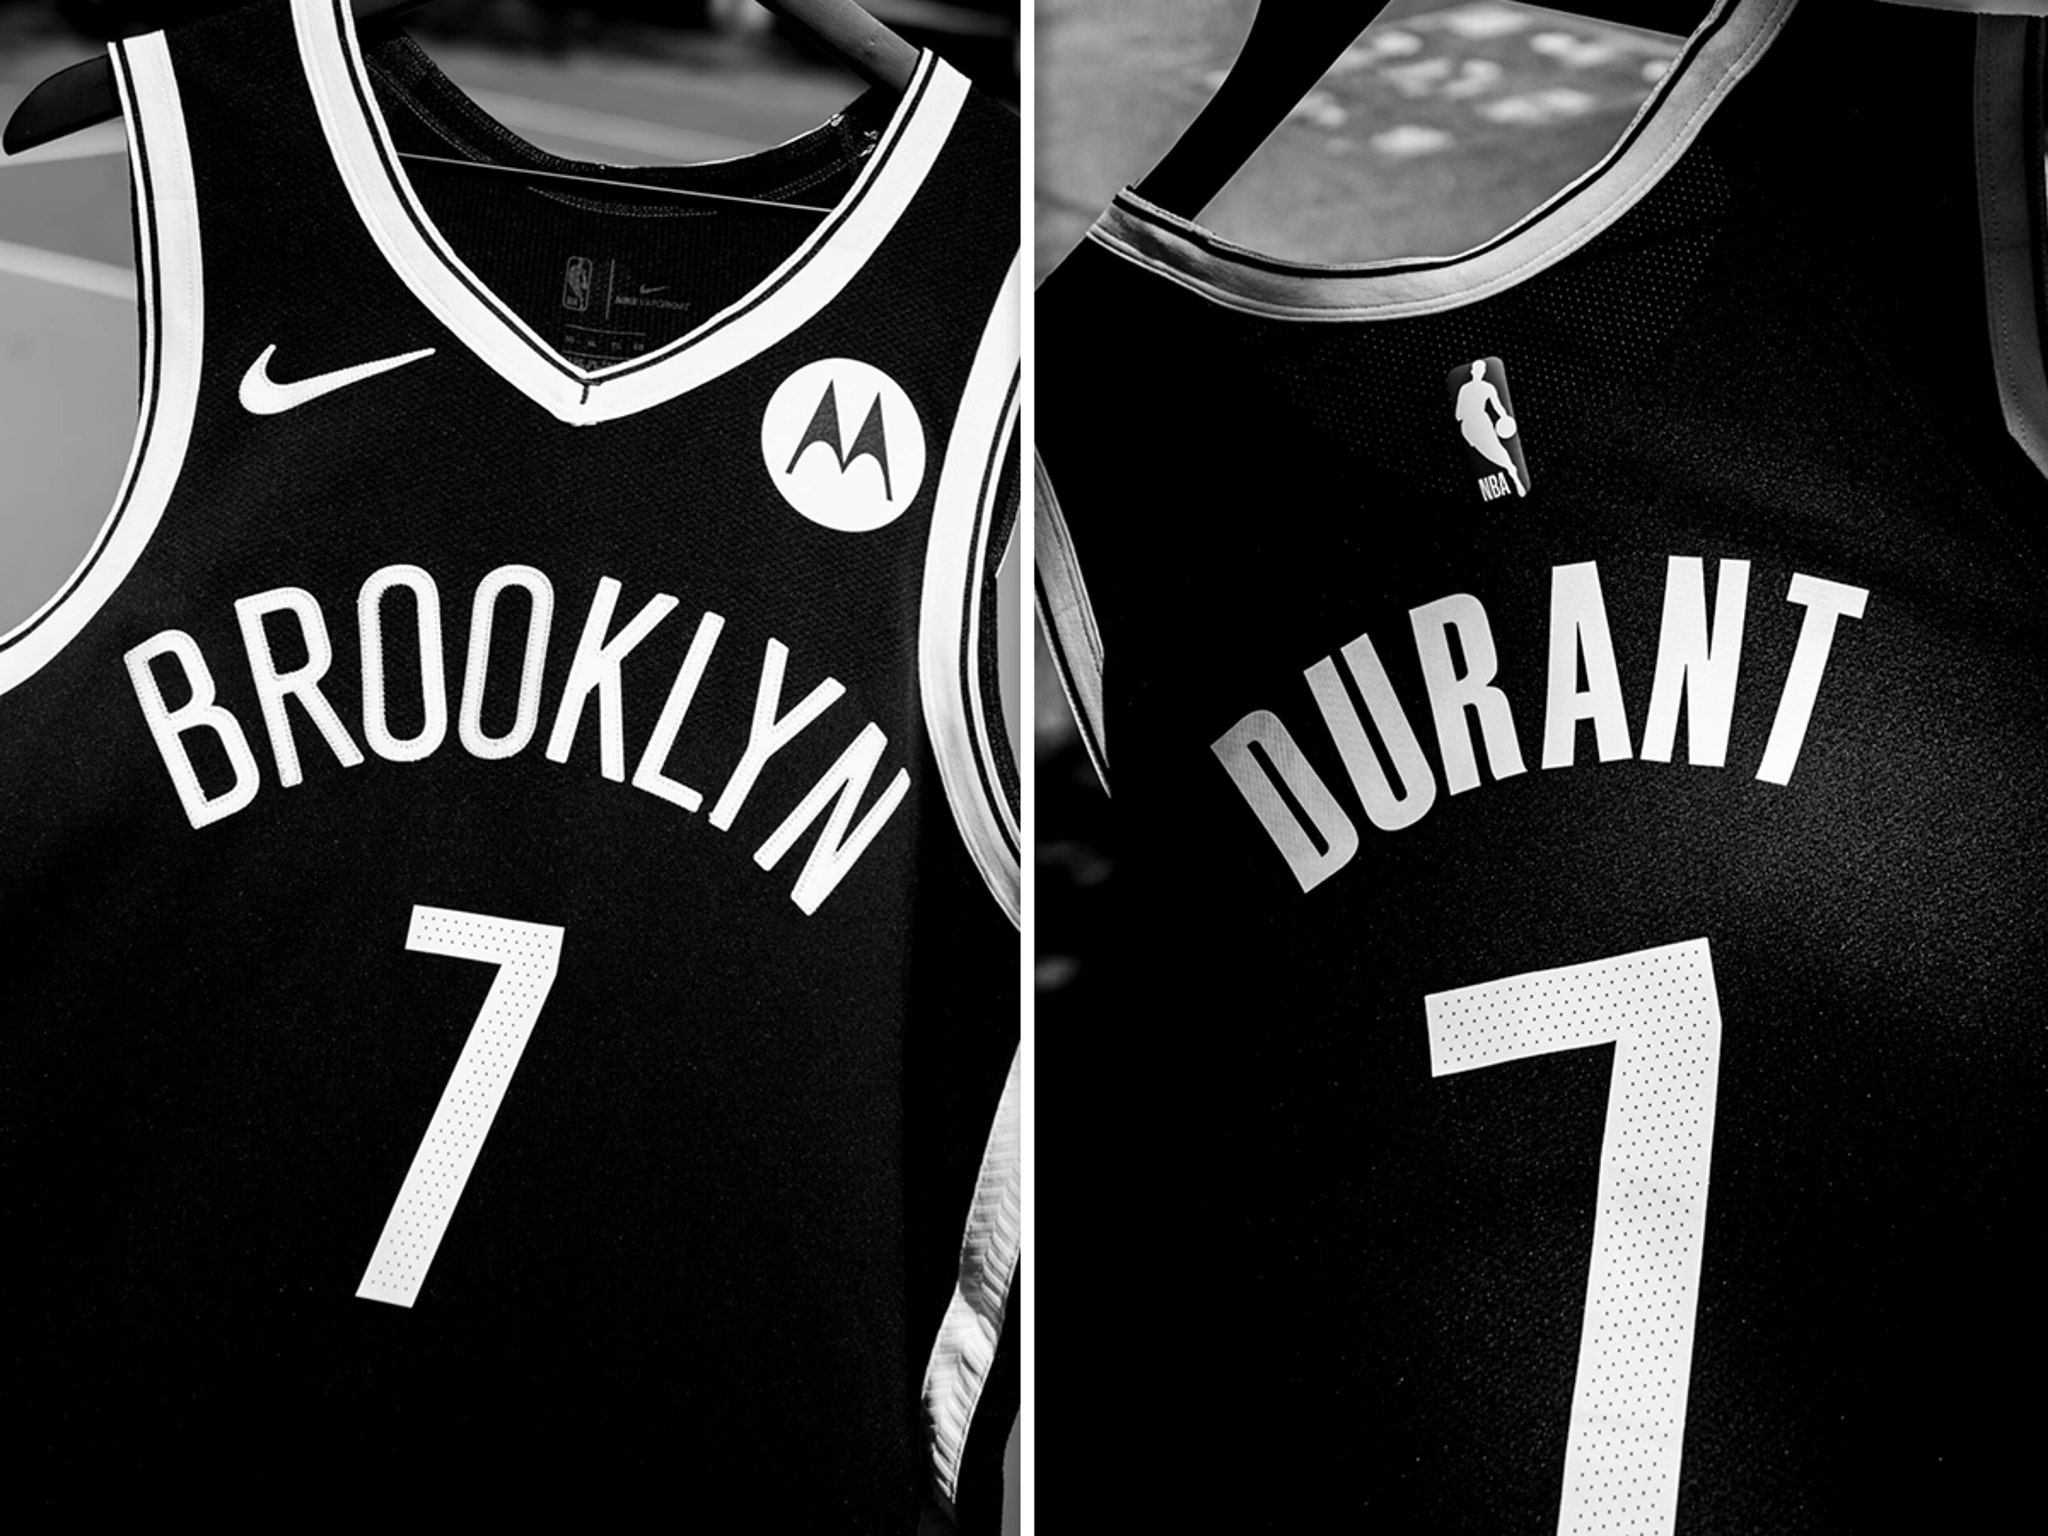 Kevin Durant Brooklyn Nets Fanatics Authentic Game-Used #7 White